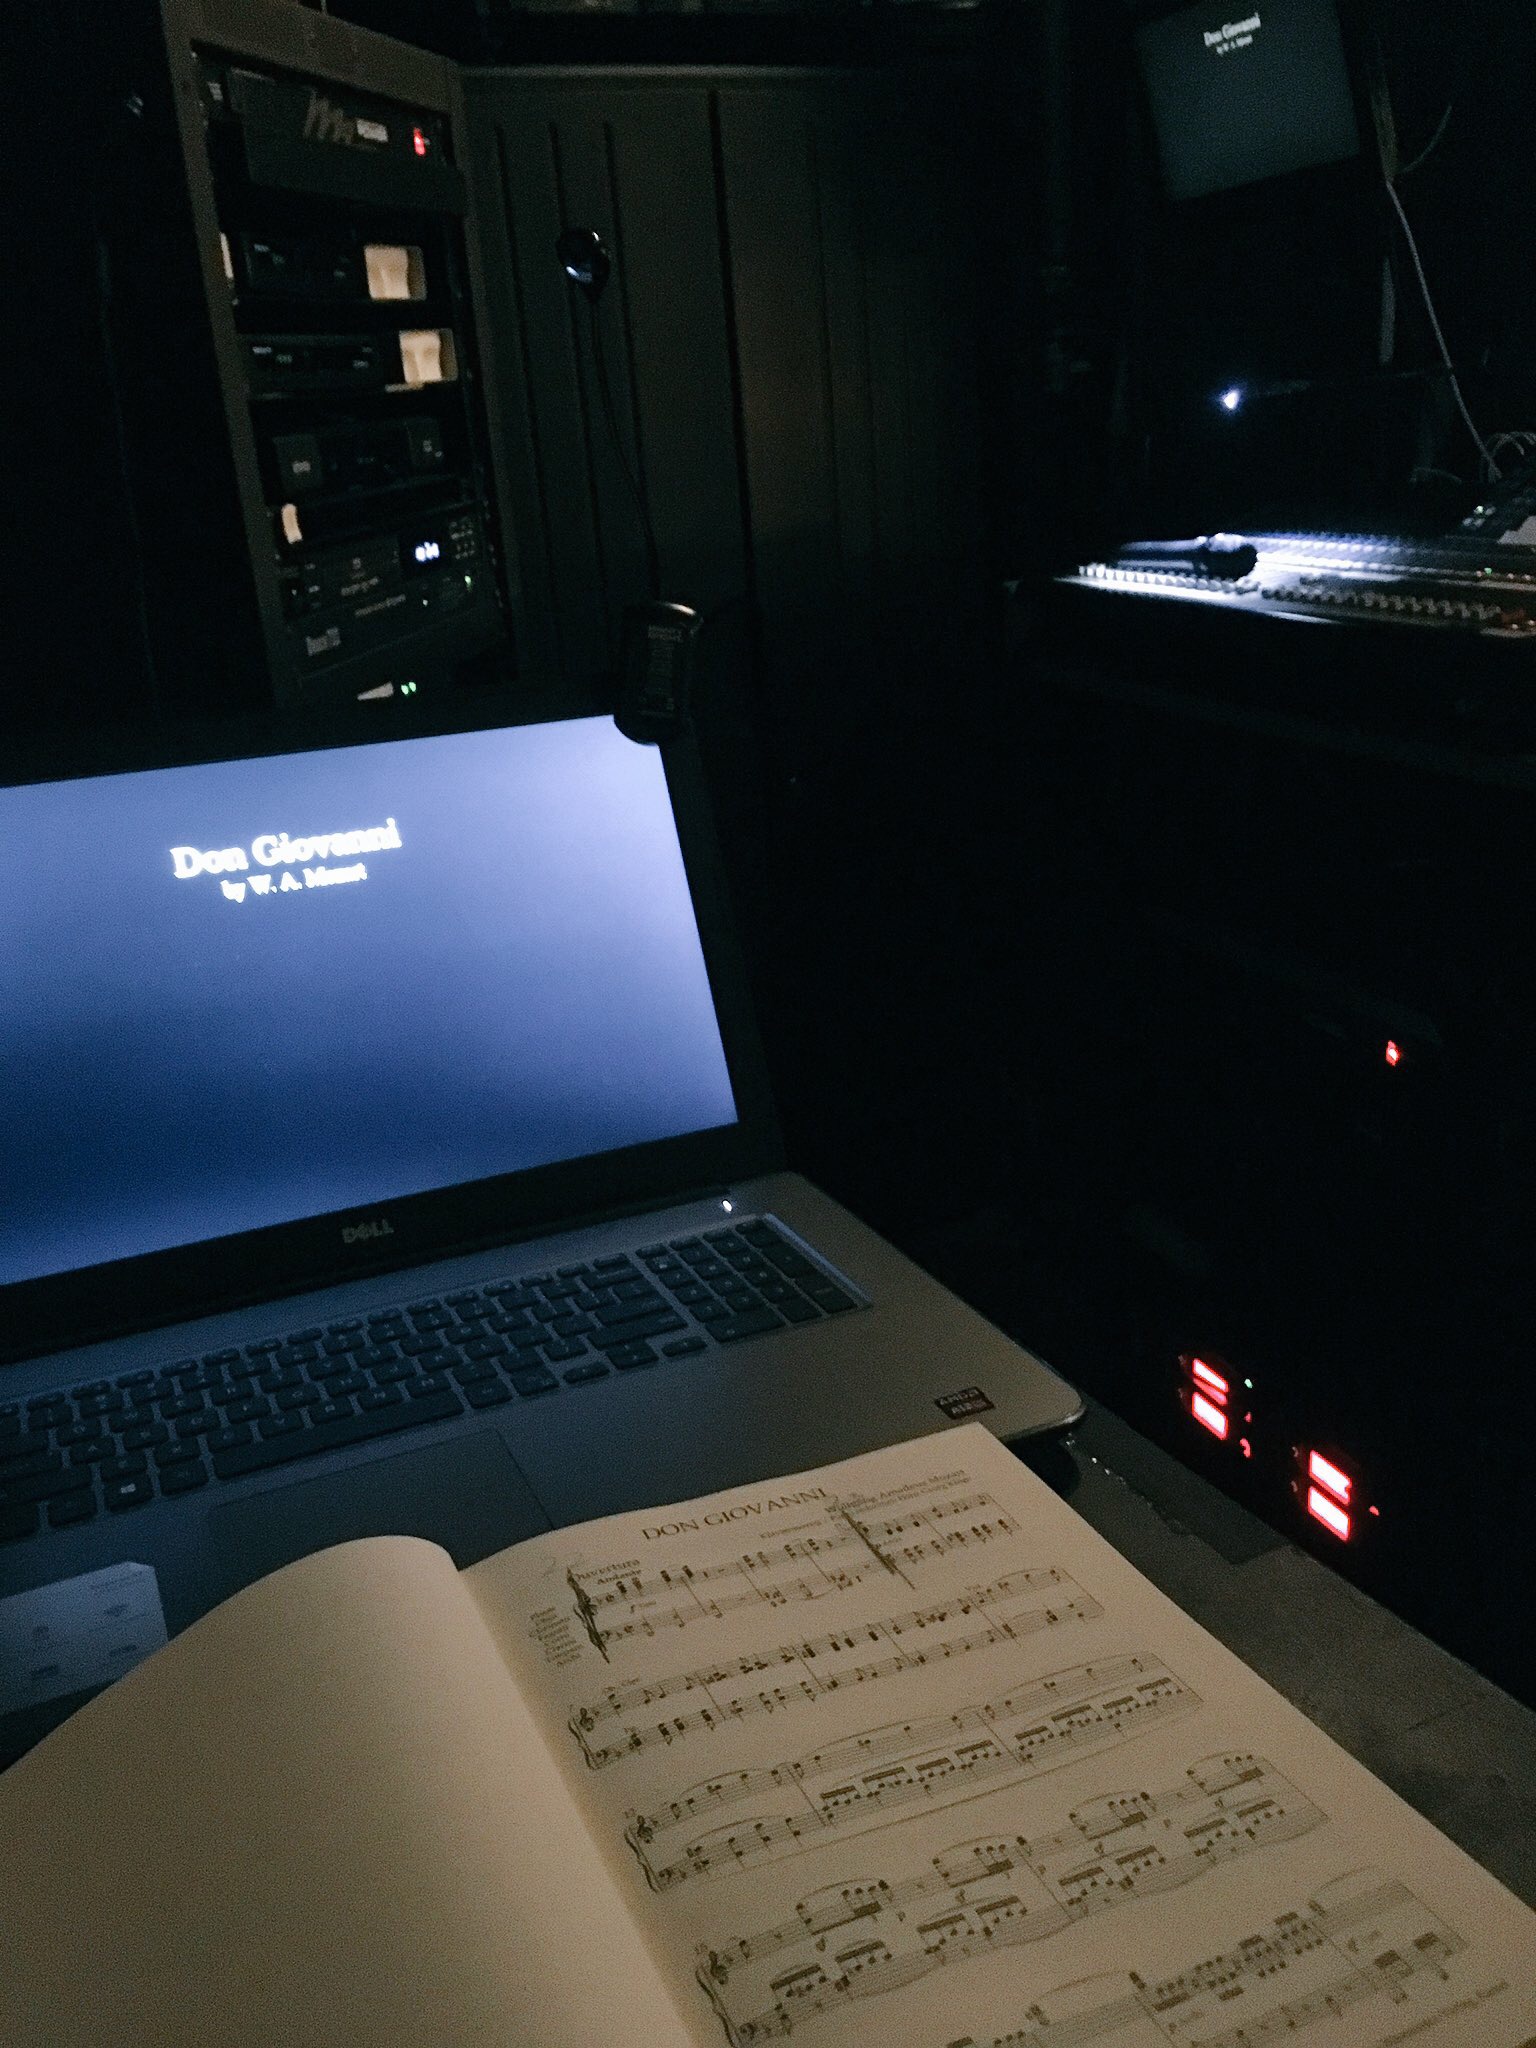 Saadya lays out the music for Don Giovanni in front of his open macbook laptop, ready to transcribe the lyrics